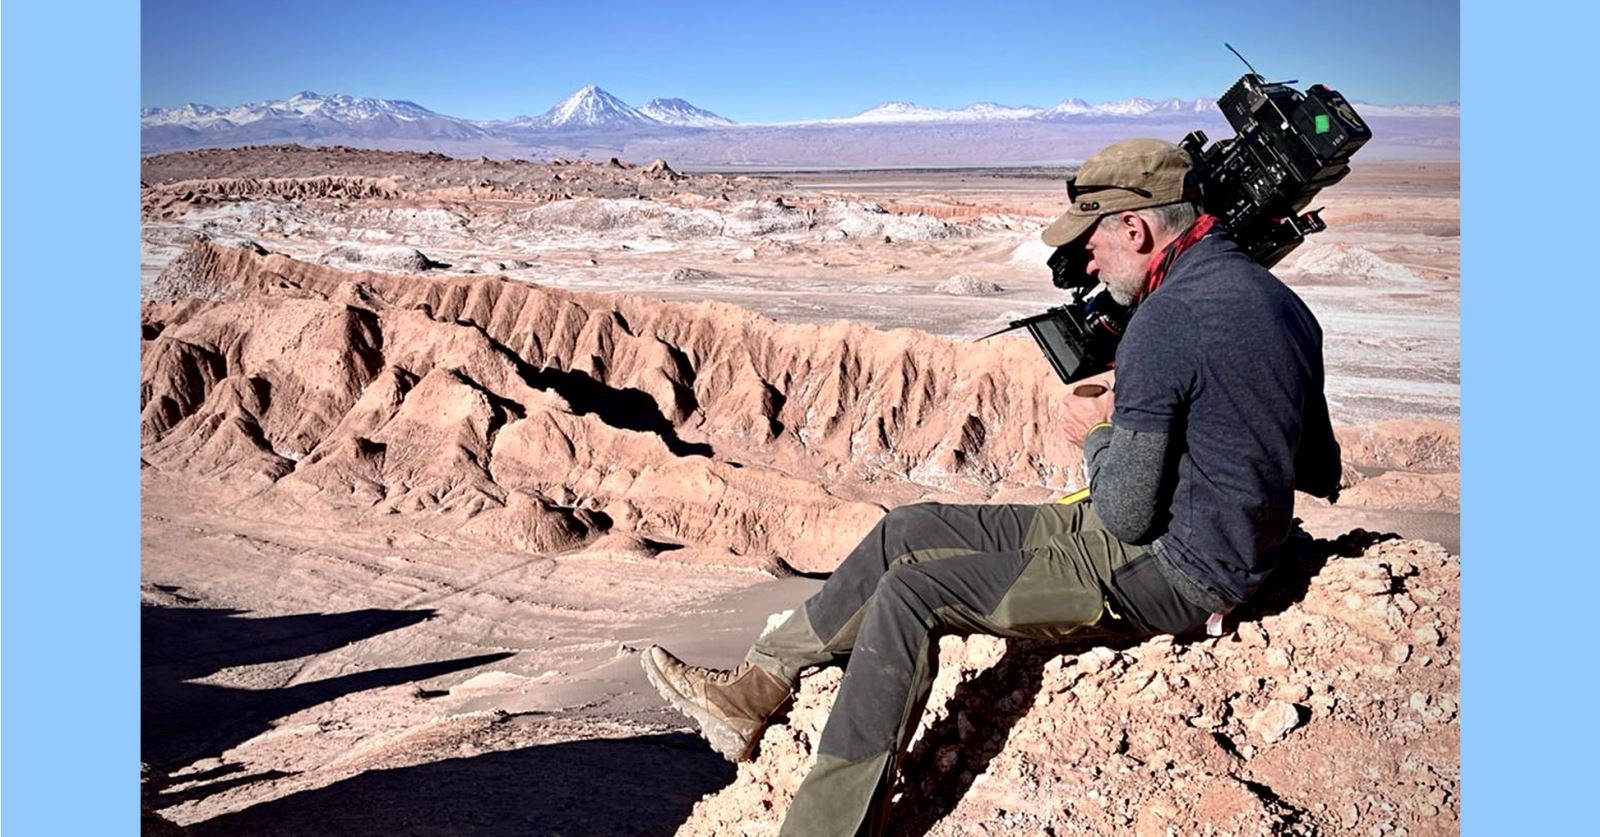 Welcome to new member Ossian Bacon seen here filming in the Andes Mountains in Chile for National Geographic